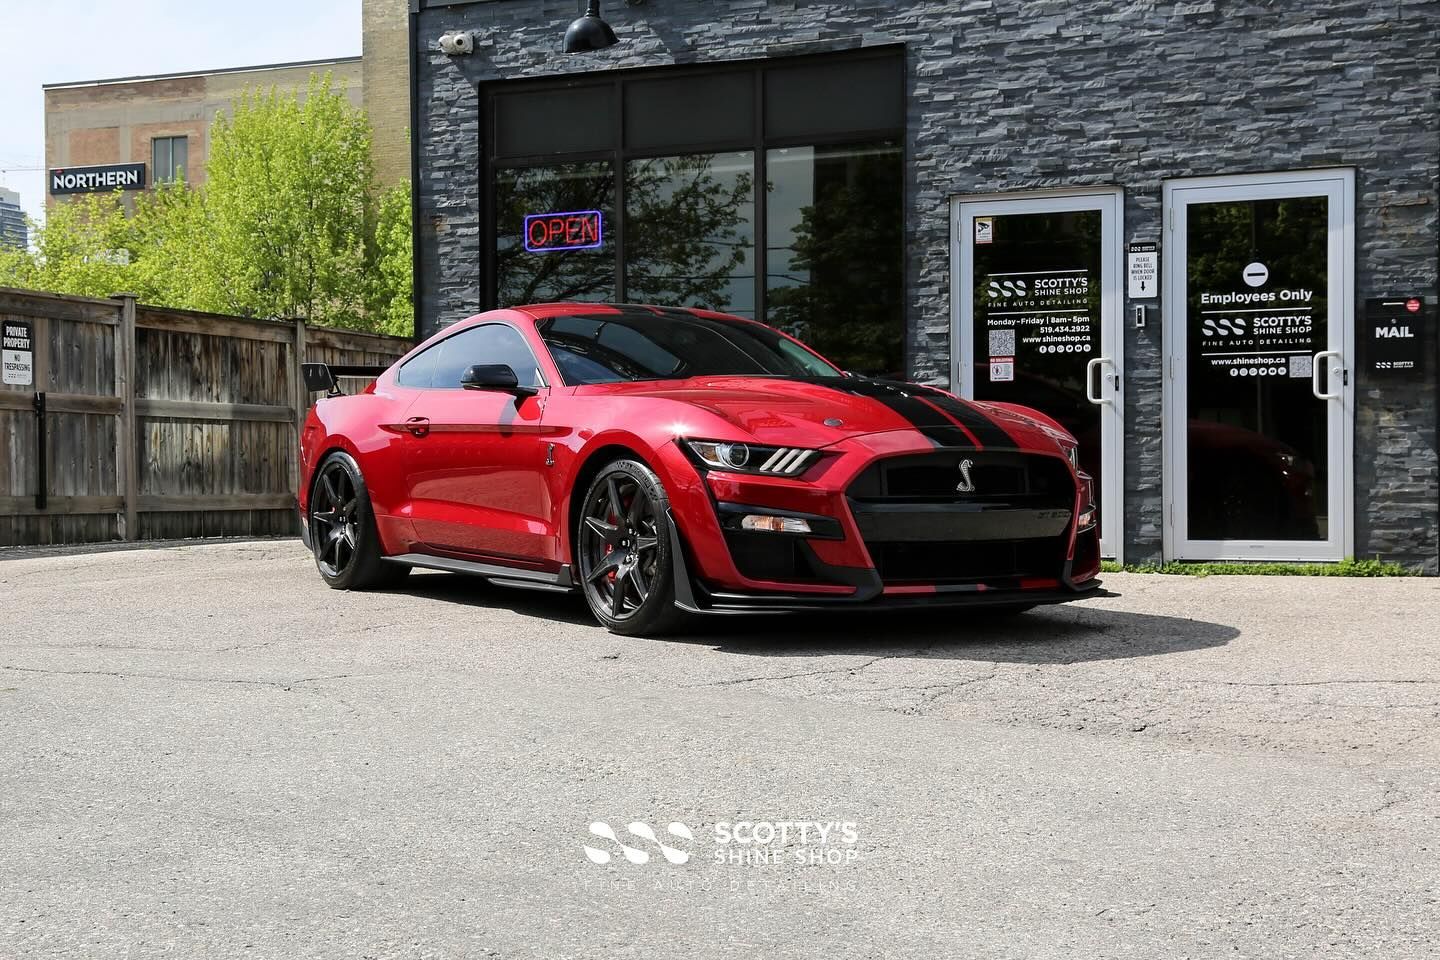 2020 Ford Mustang GT500 out of hibernation and in the shop for a spring detail and inspection. We in